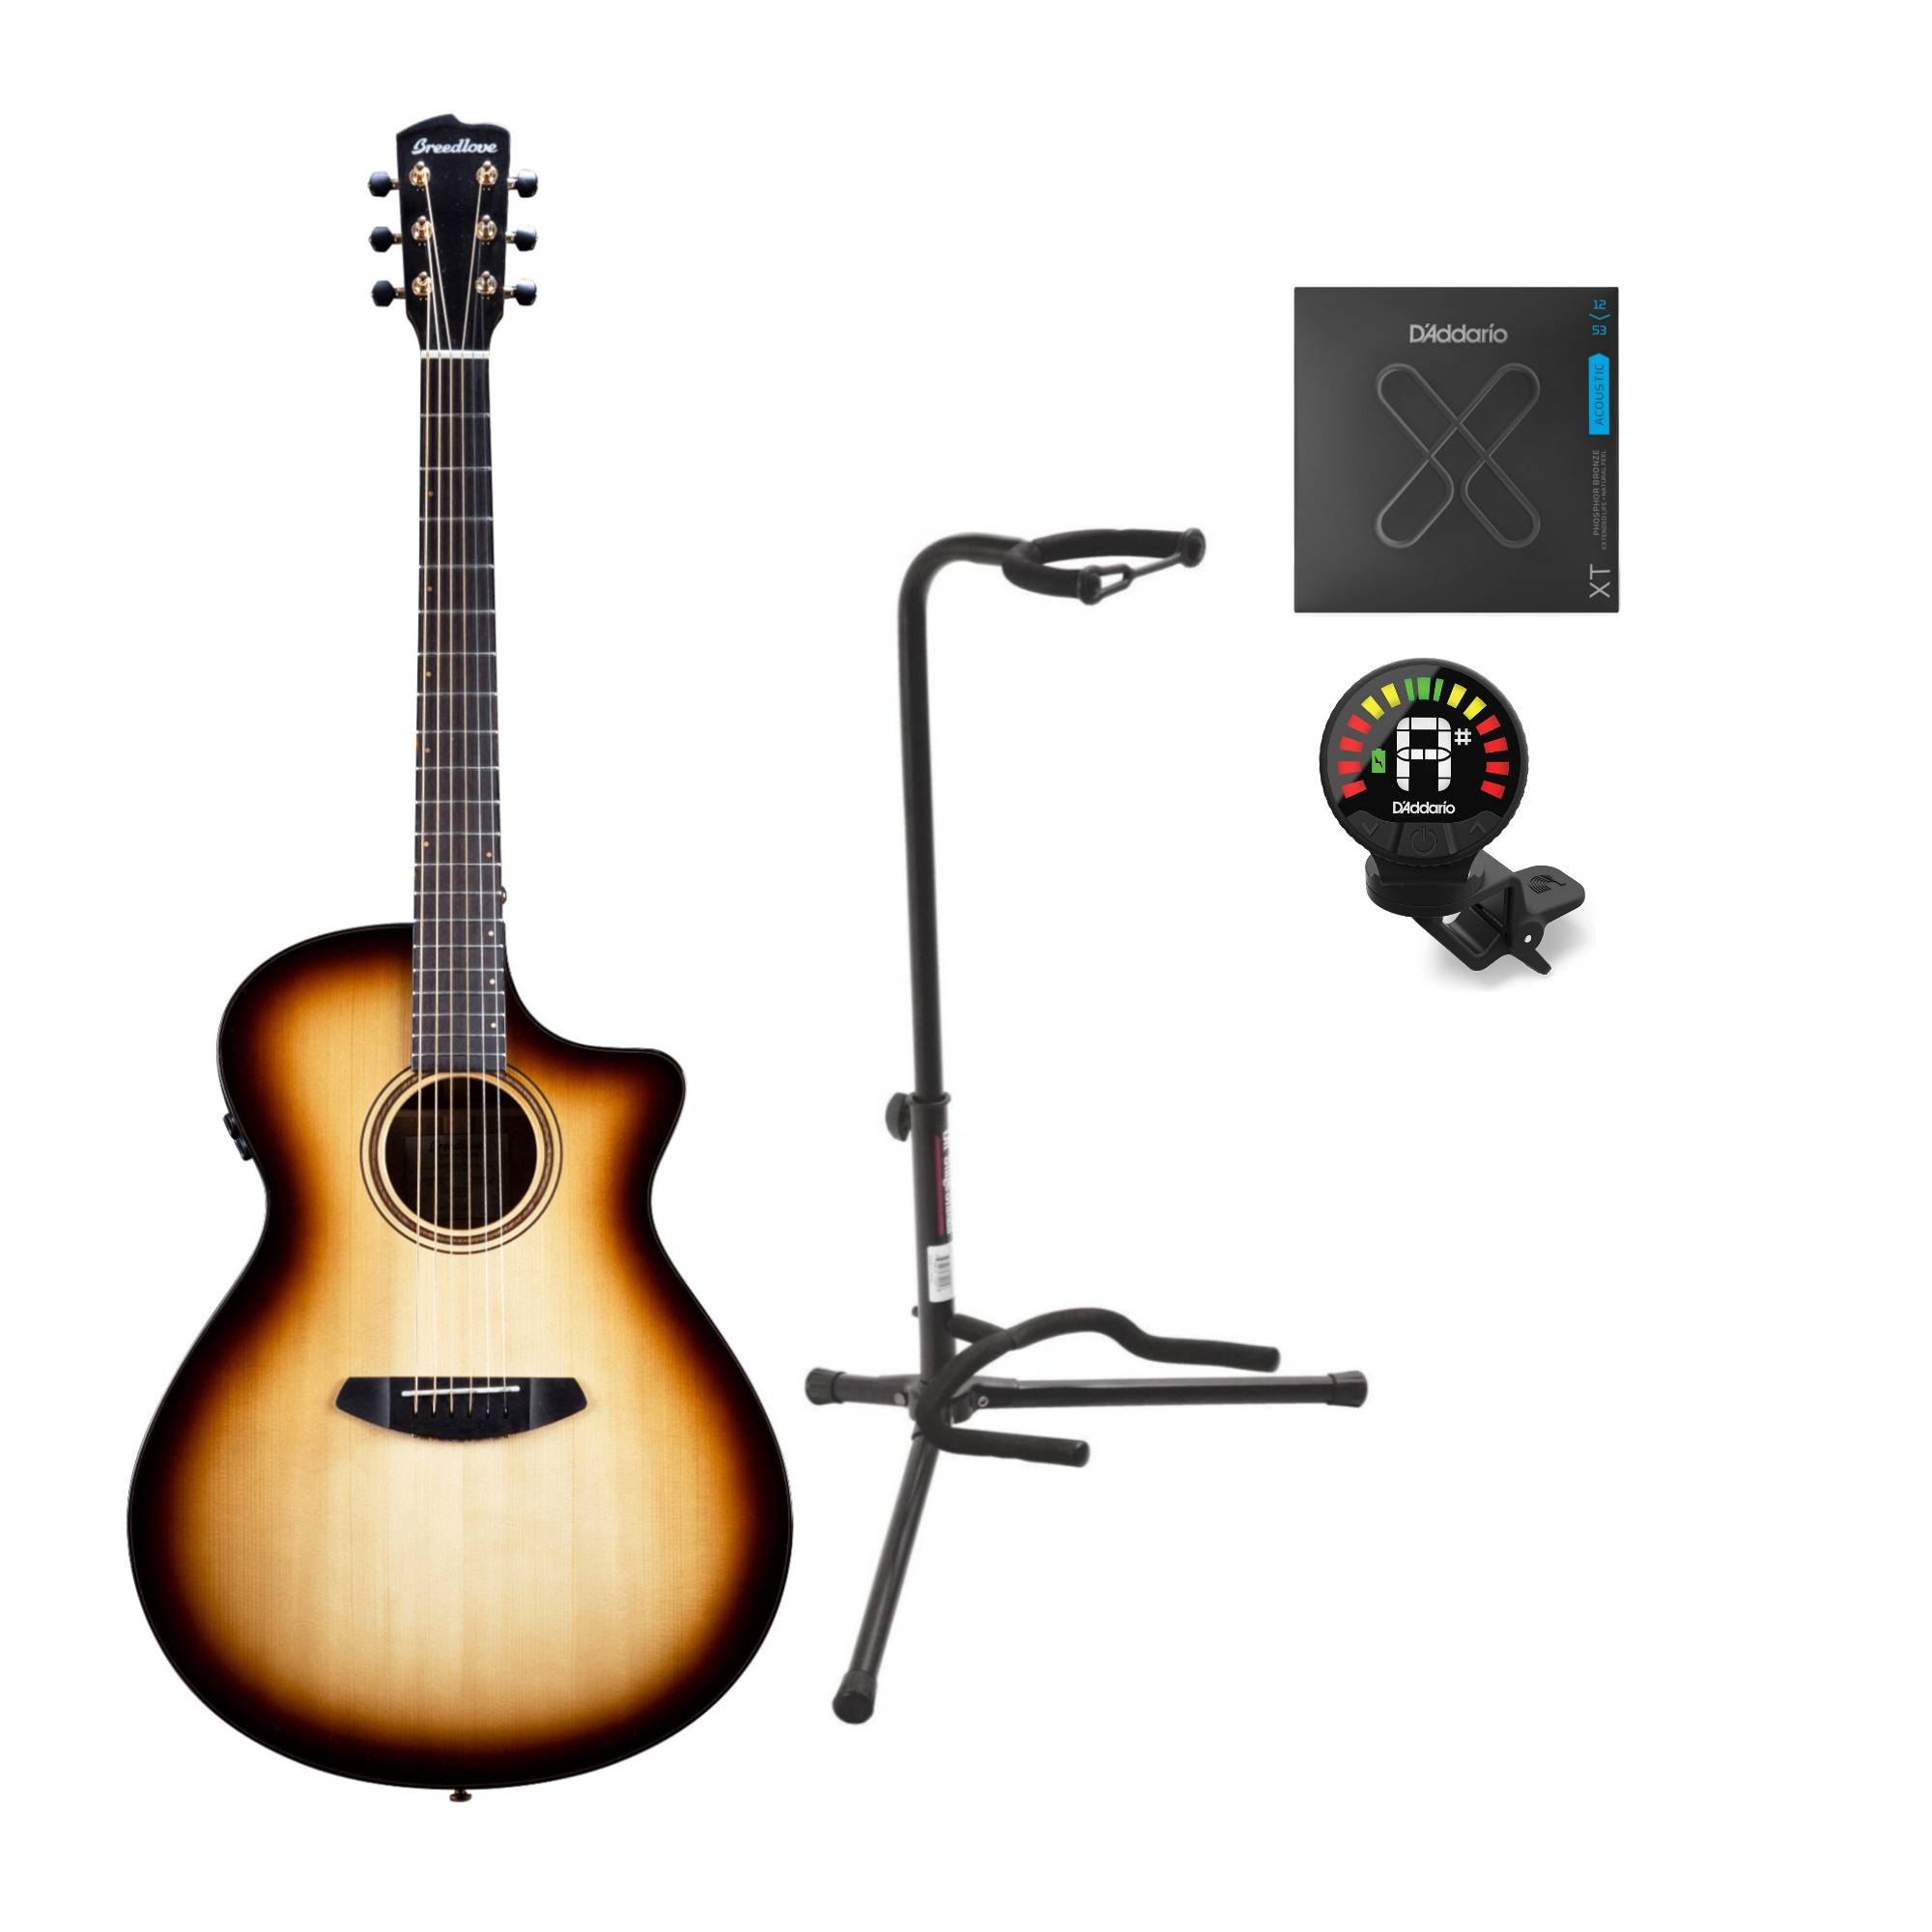 Breedlove Artista Pro Concerto CE Acoustic Guitar (Burnt Amber) with Stand, Tuner, and Strings